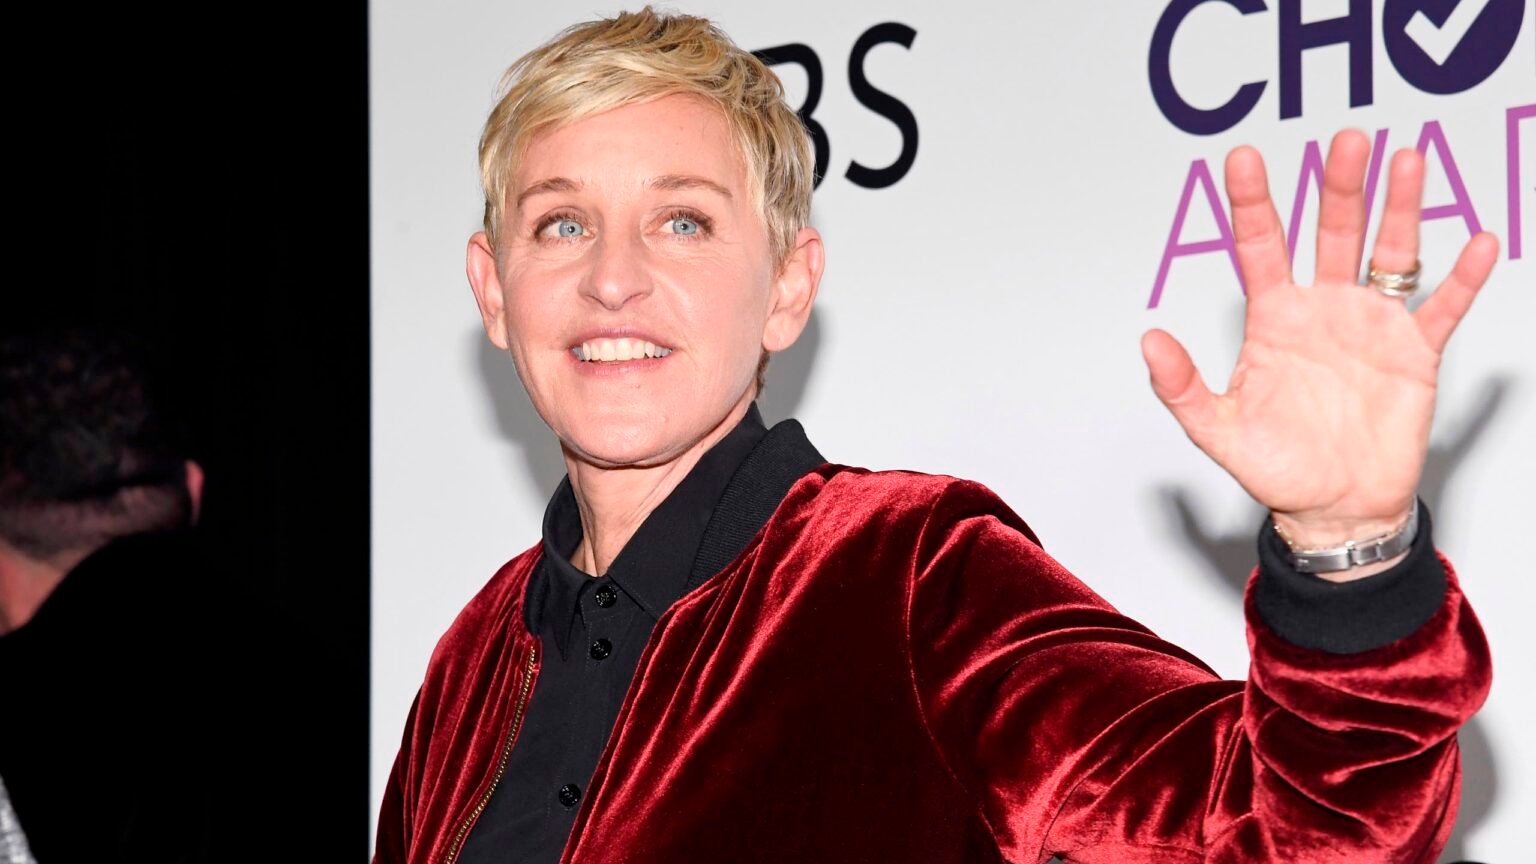 Ellen Degeneres and her wife Portia were hit by a burglar back in July, but the police are telling their neighbors it was an inside job.